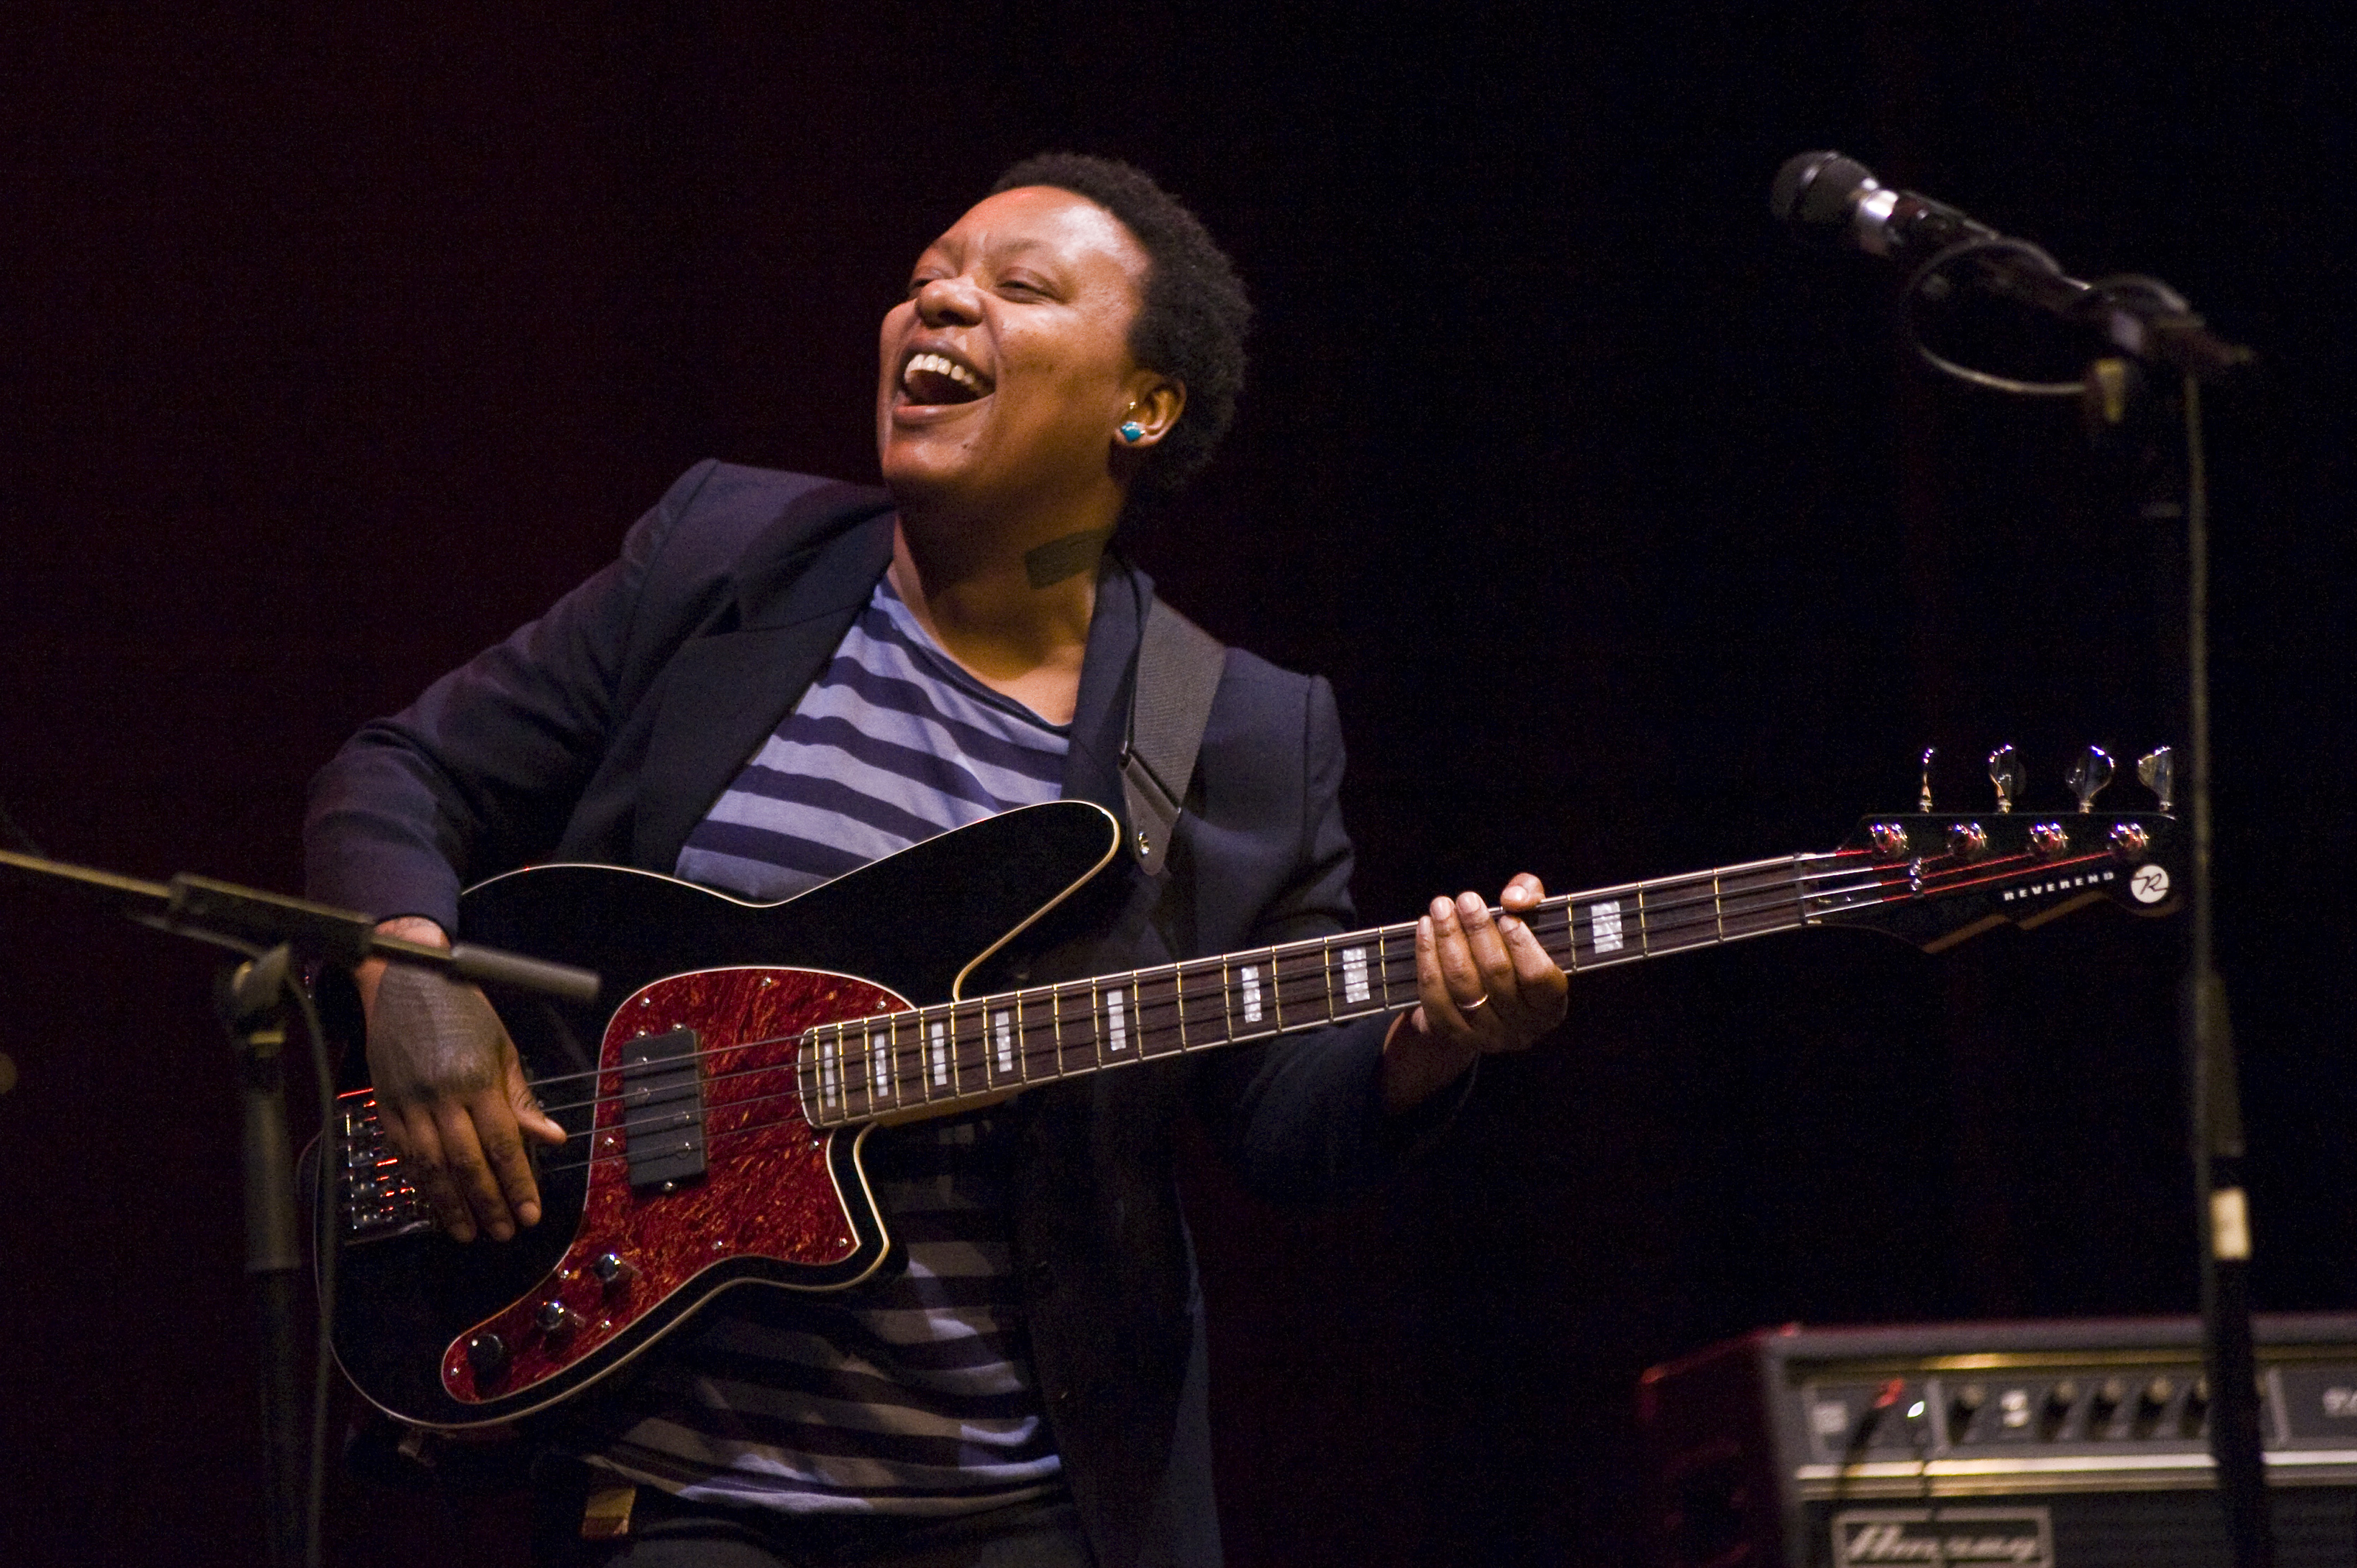 Meshell Ndegeocello's Cover of TLC's "Waterfalls" Is an Unexpected Revelation